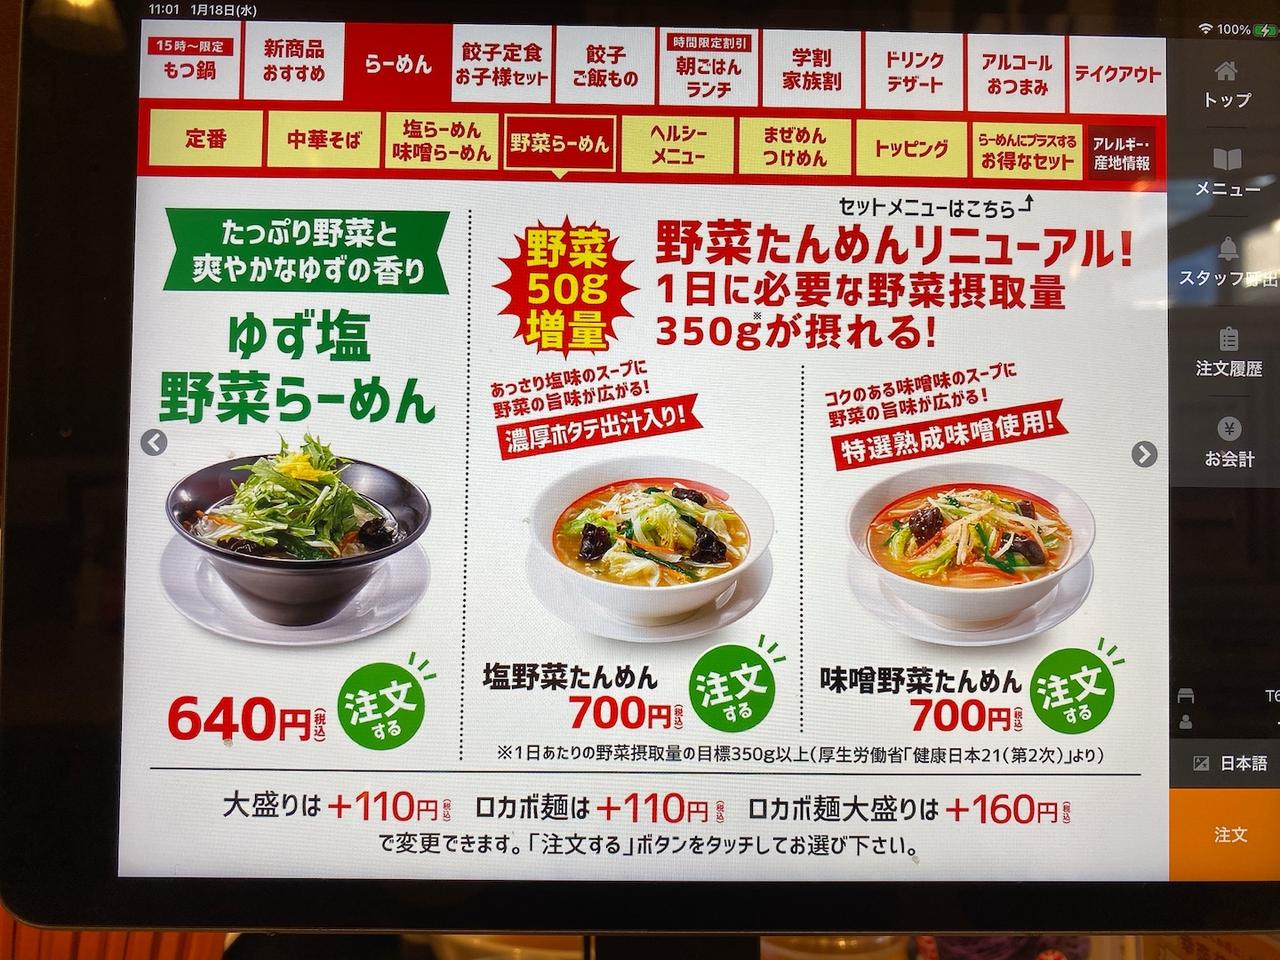 Menu screen of Kourakuen. Noodles can be selected from low-carb noodles.